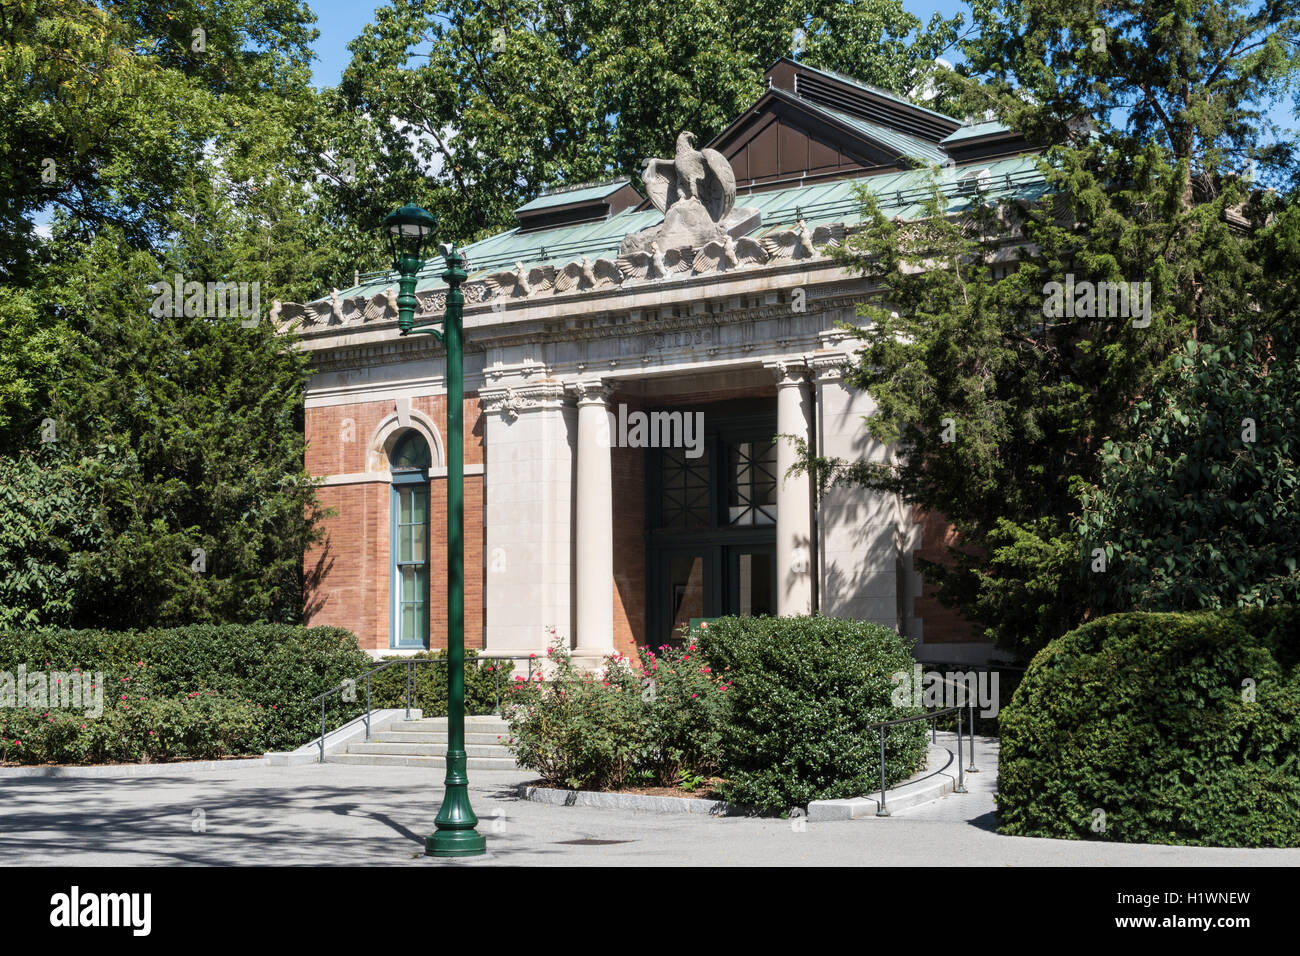 Le zoo du Bronx, Wildlife Conservation Society, Parc Bronx, Bronx, NYC Banque D'Images